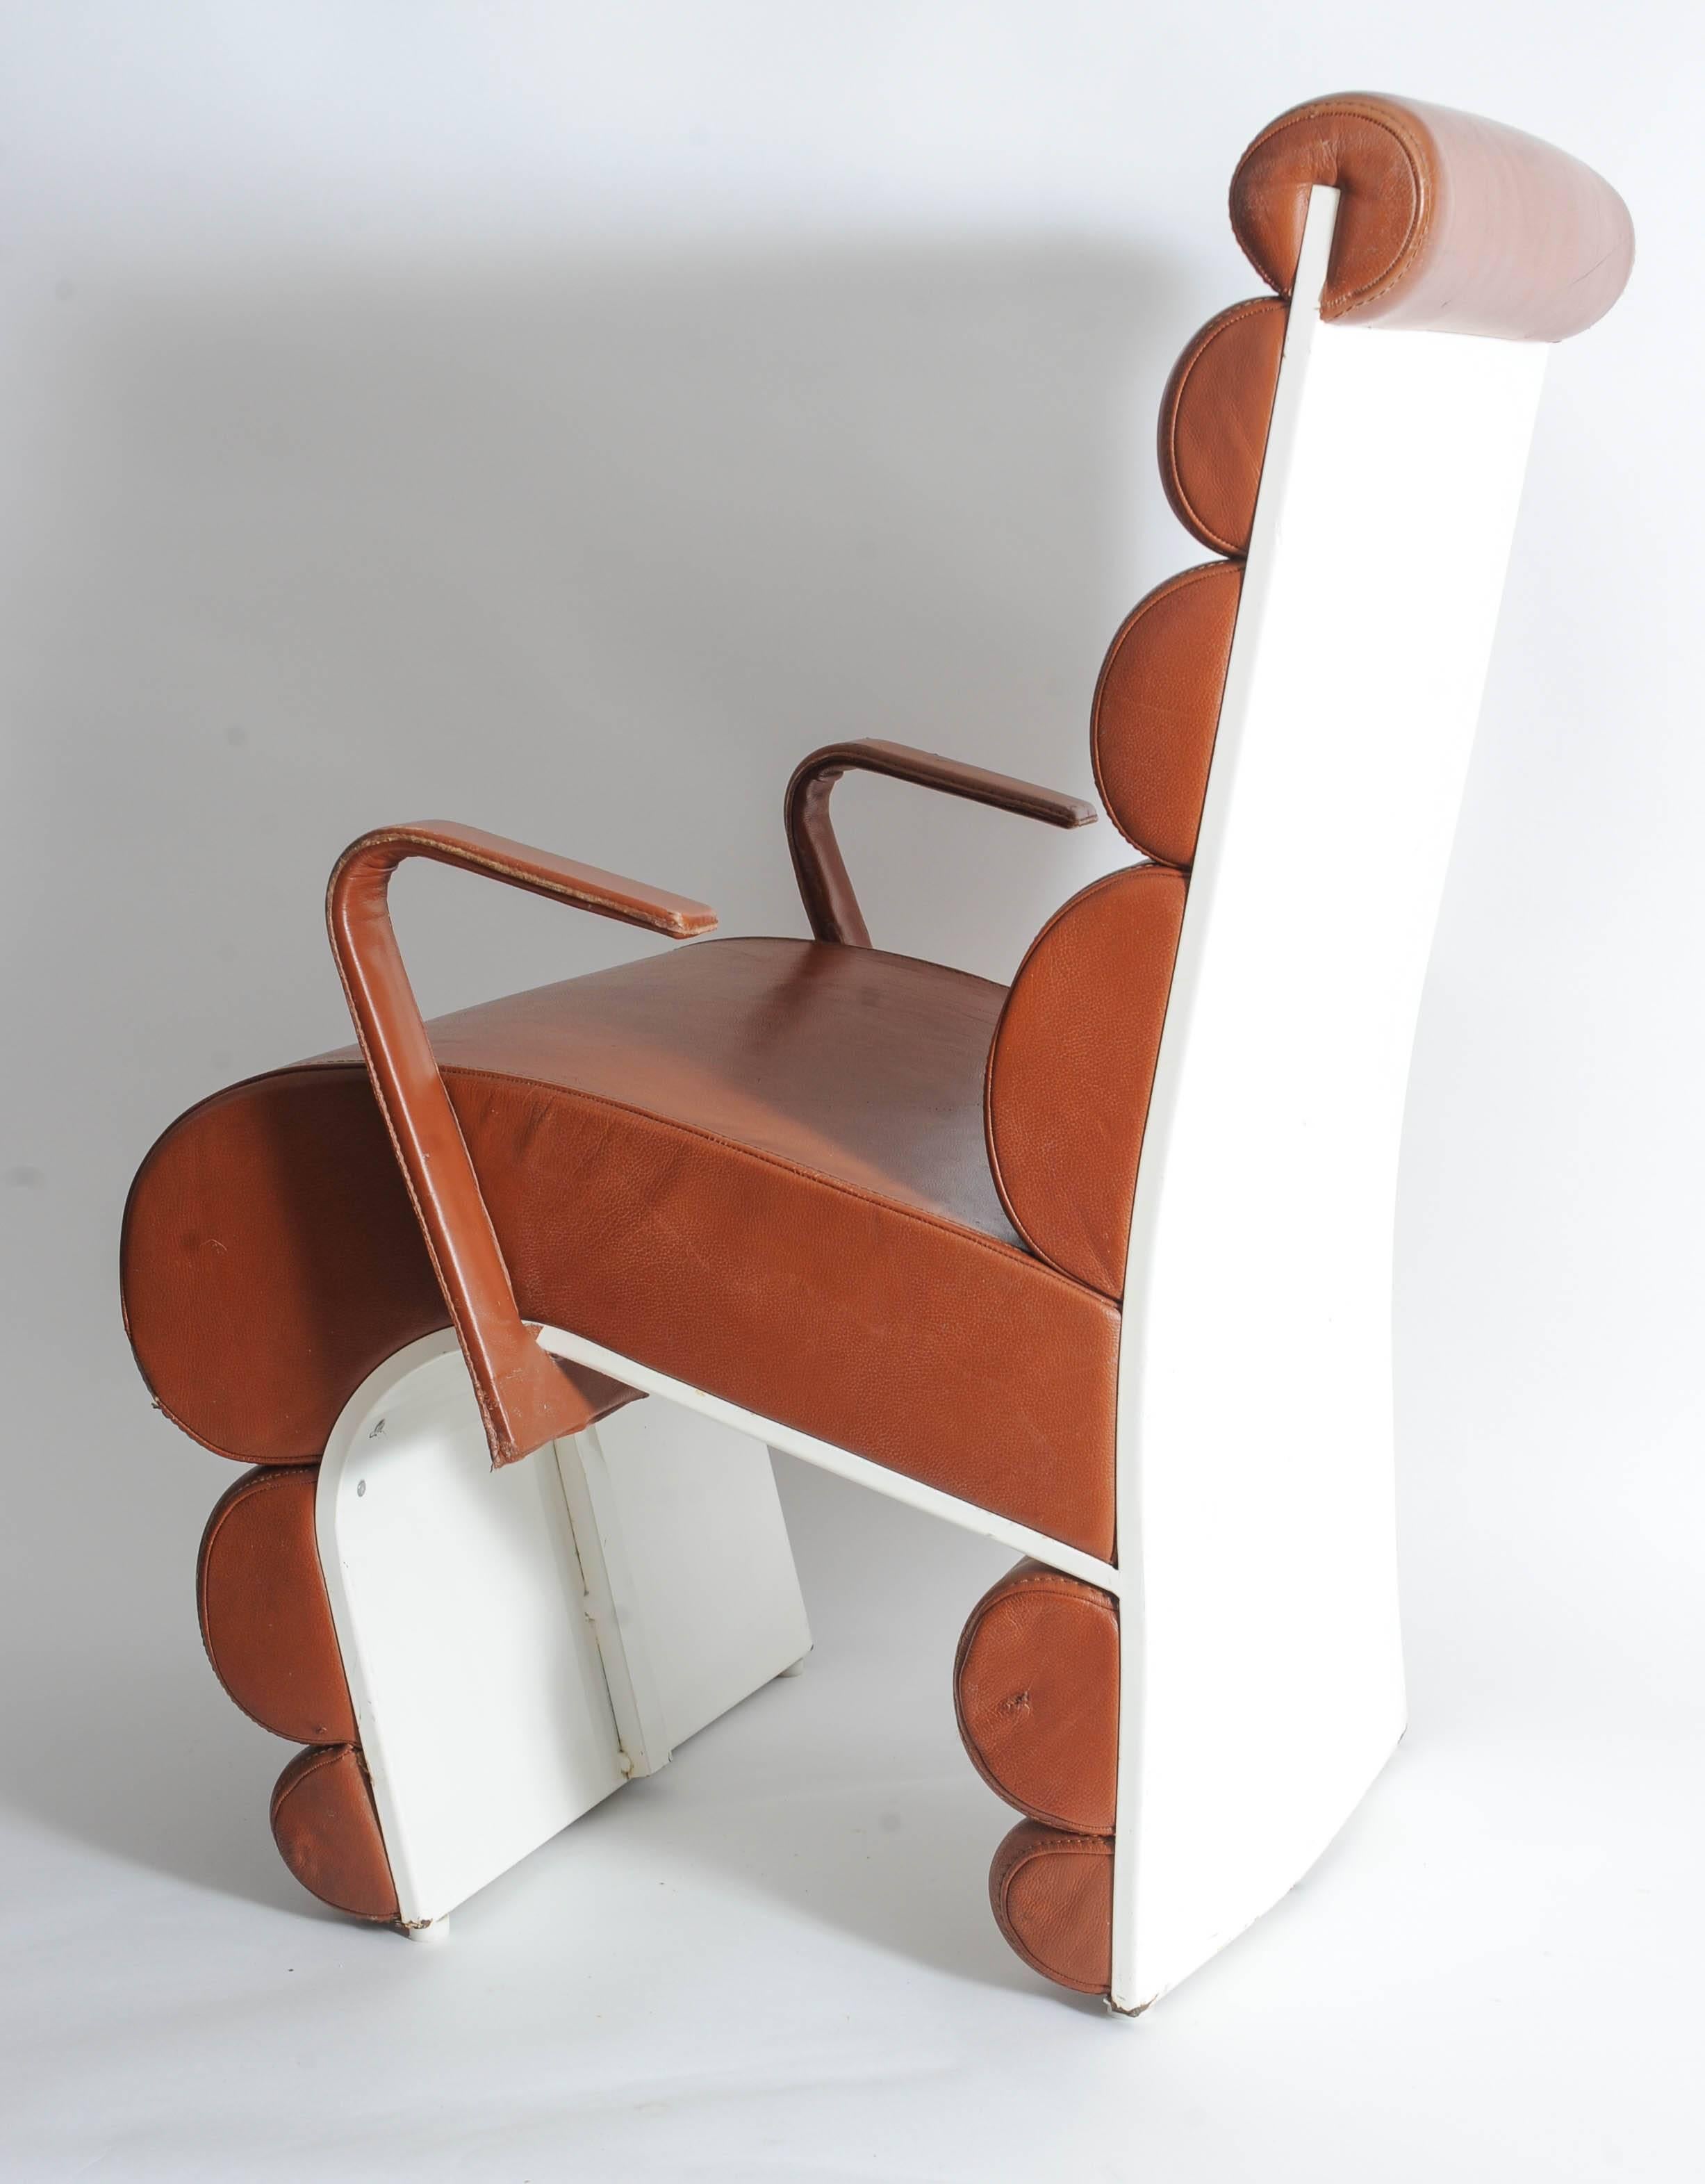 French Steel and leather chairs designed for Parisian nightclub Le Queen